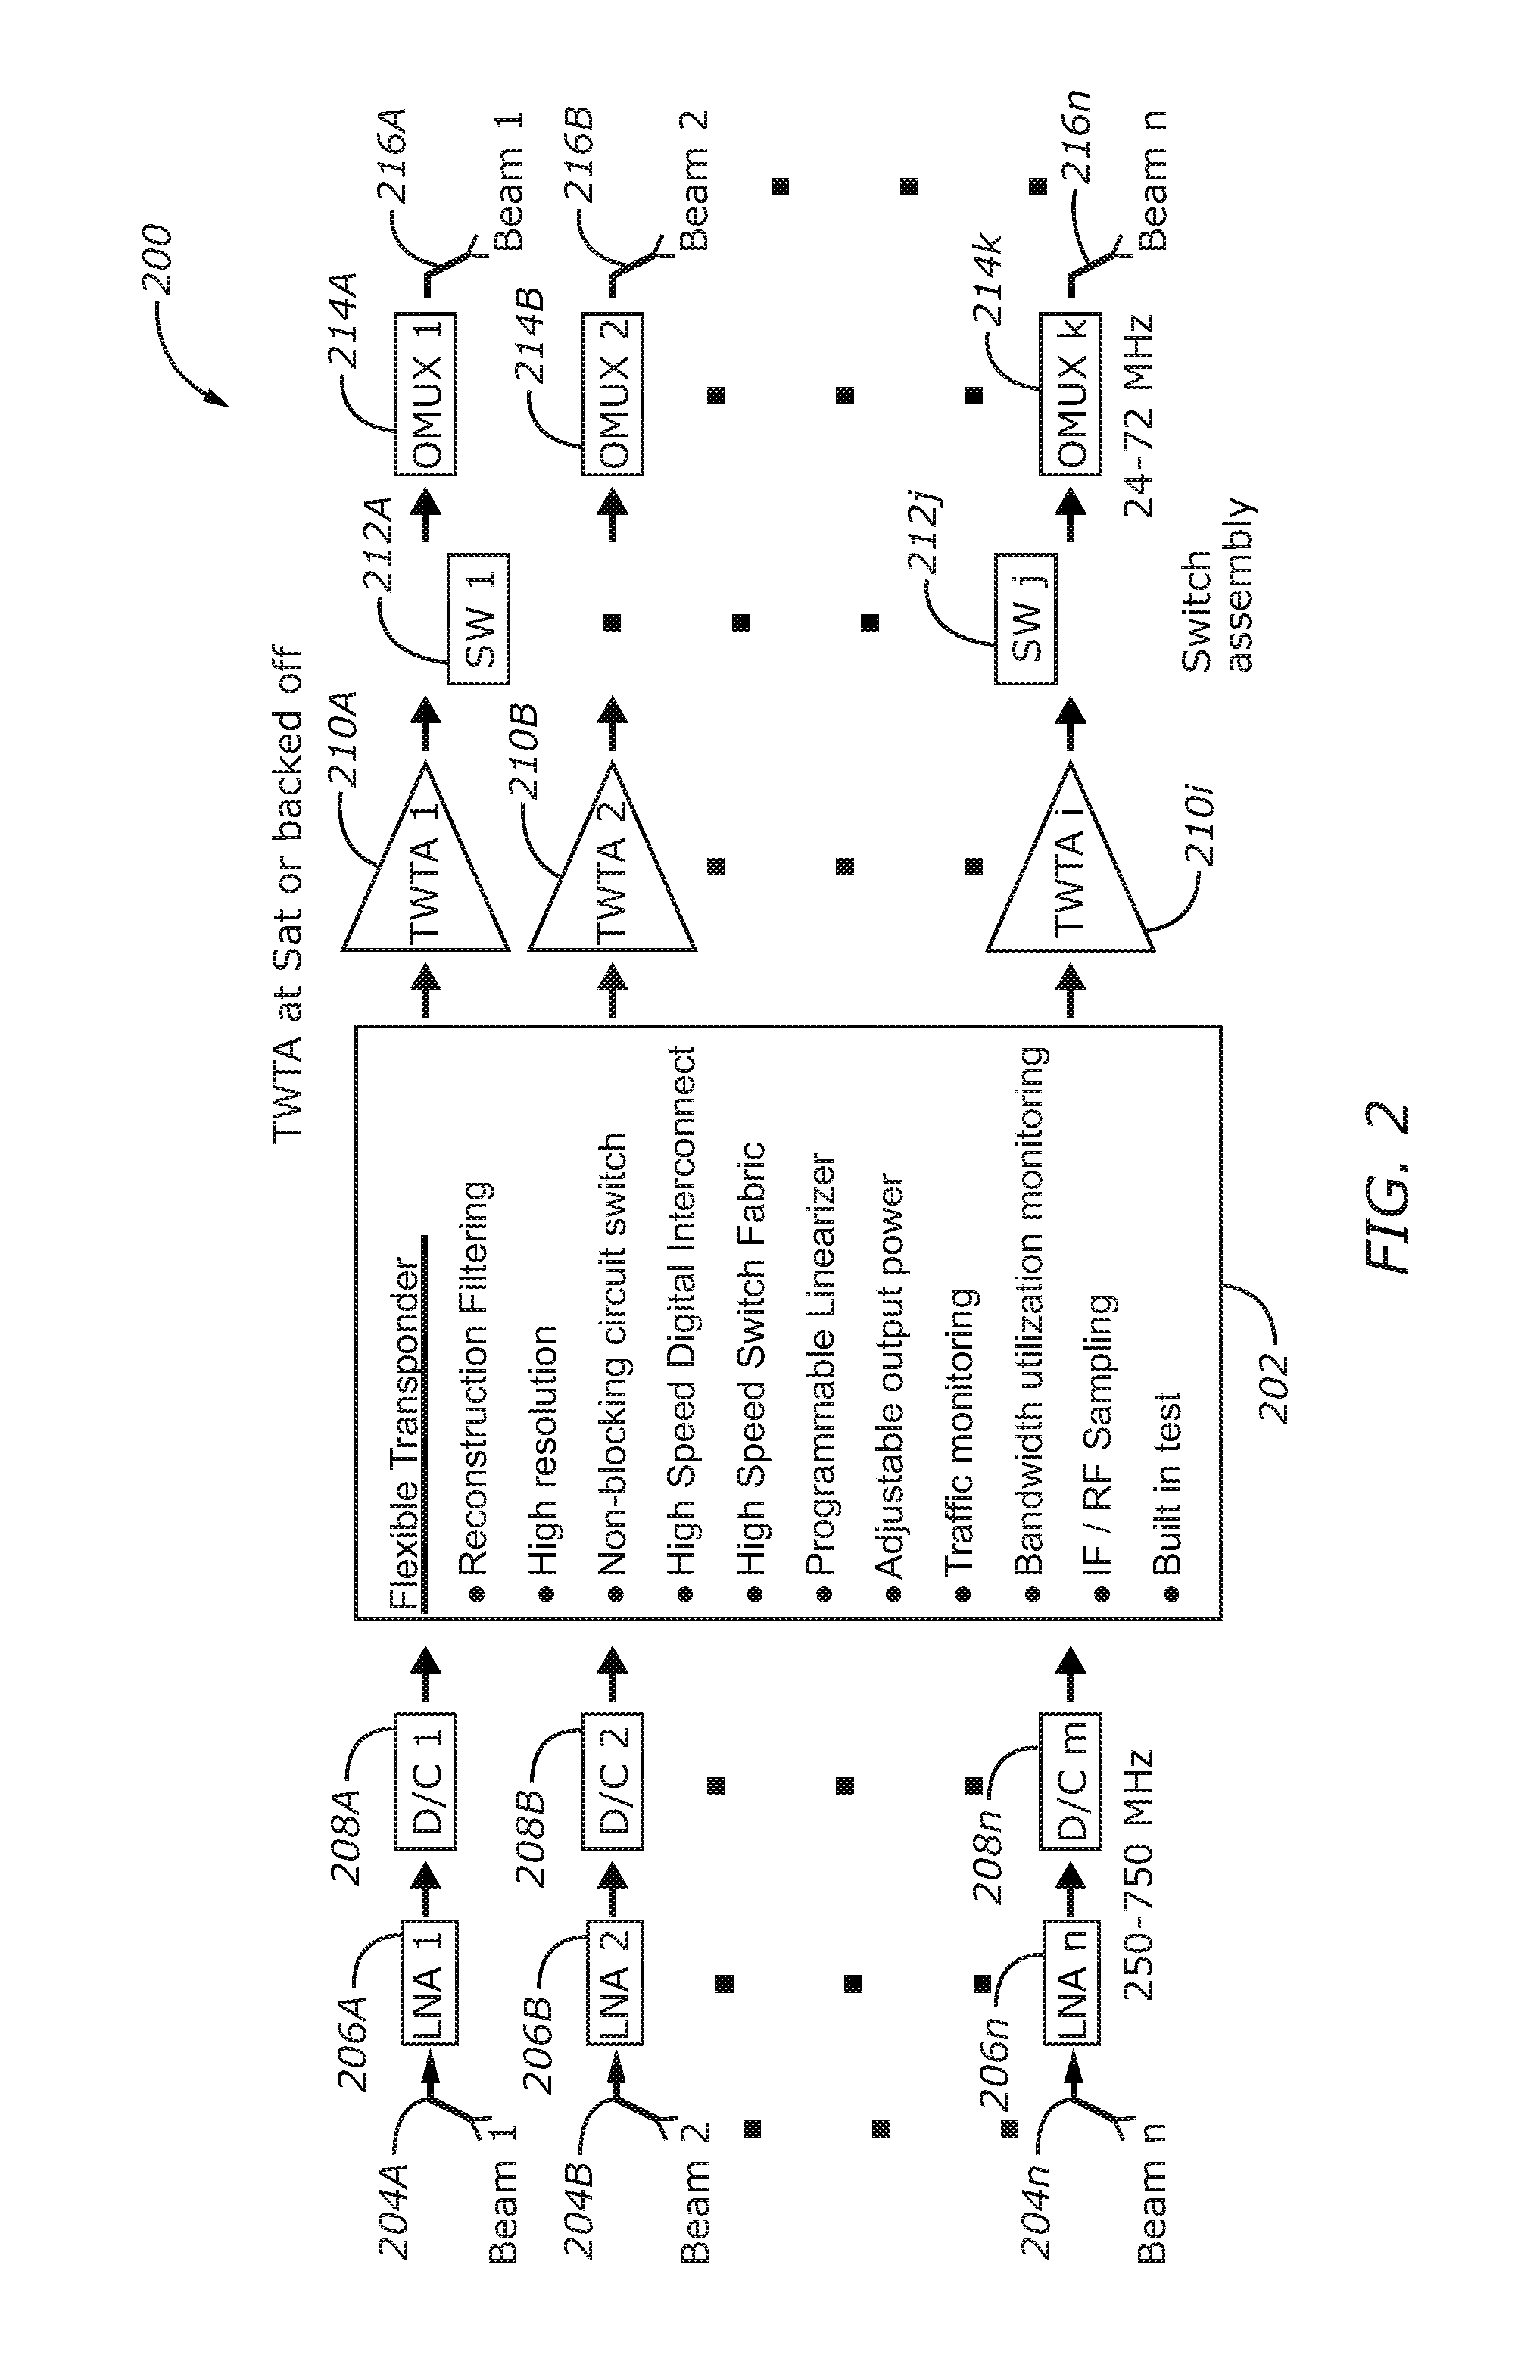 Systems and Methods for Digital Processing of Satellite Communications Data